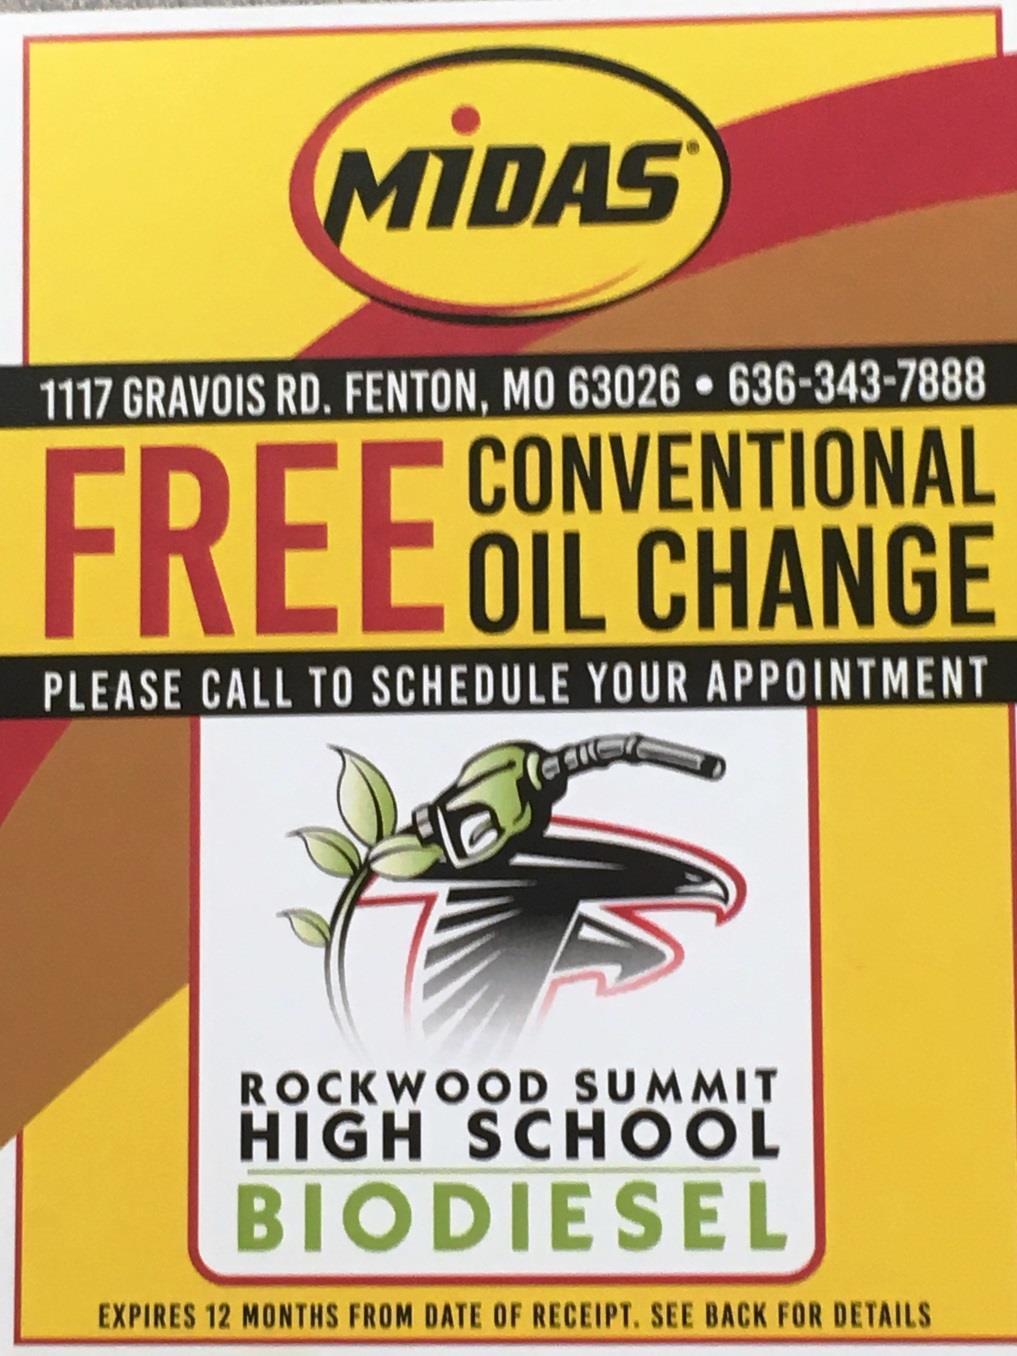 Biodiesel *Midas of Fenton is providing oil change coupons for the Rockwood Summit